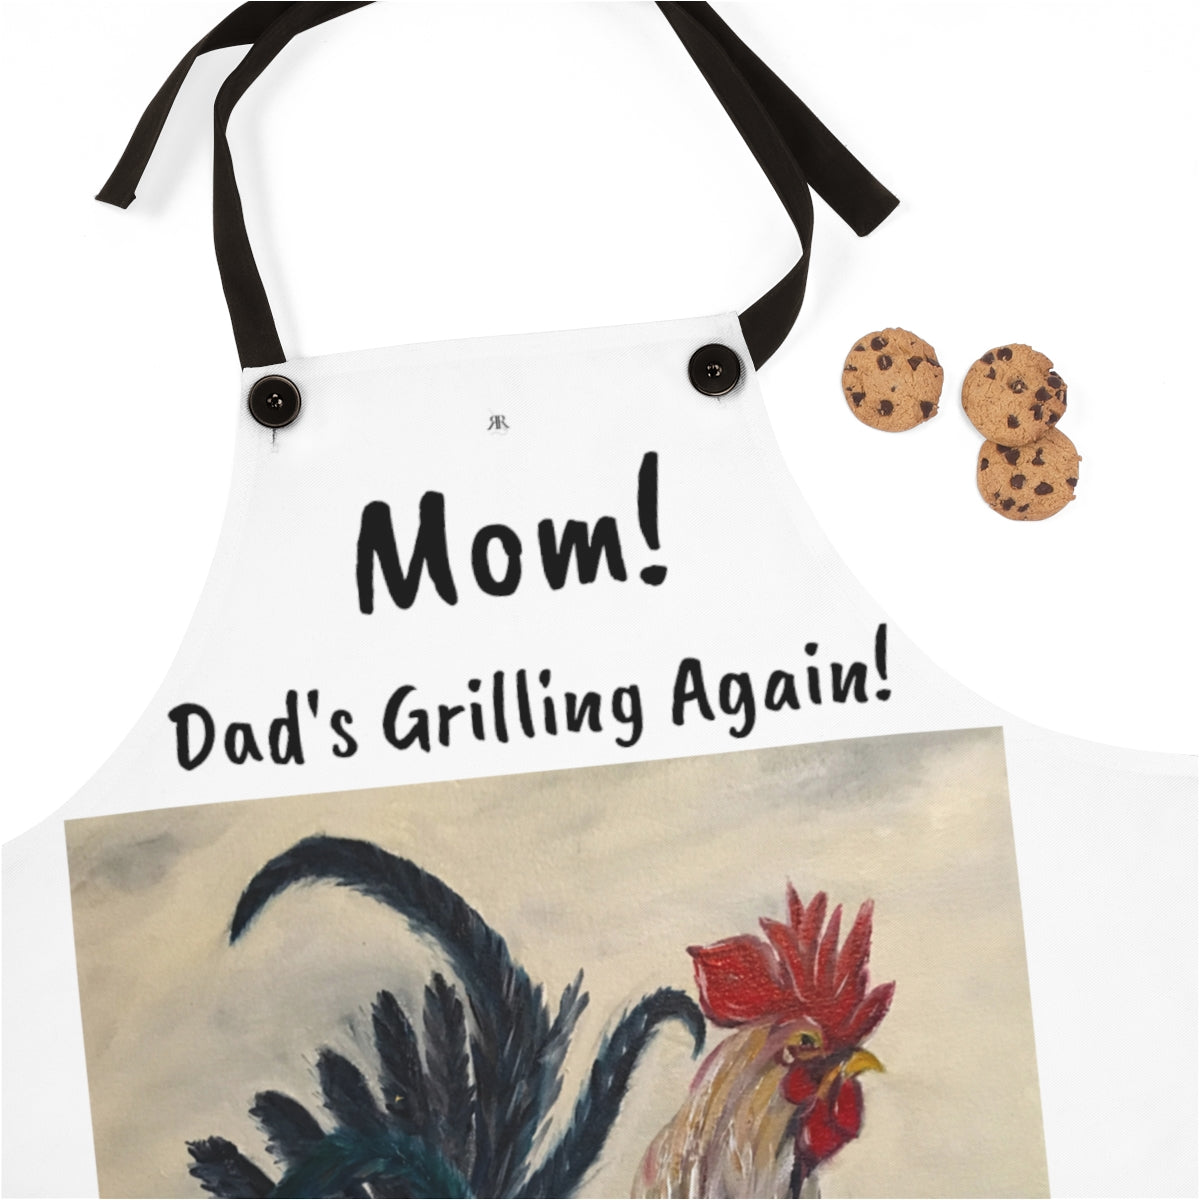 Mom!  Dad's Grilling Again!  saying with Original Rooster Painting  Boss Printed on a white cooking Apron Fathers Day Gift